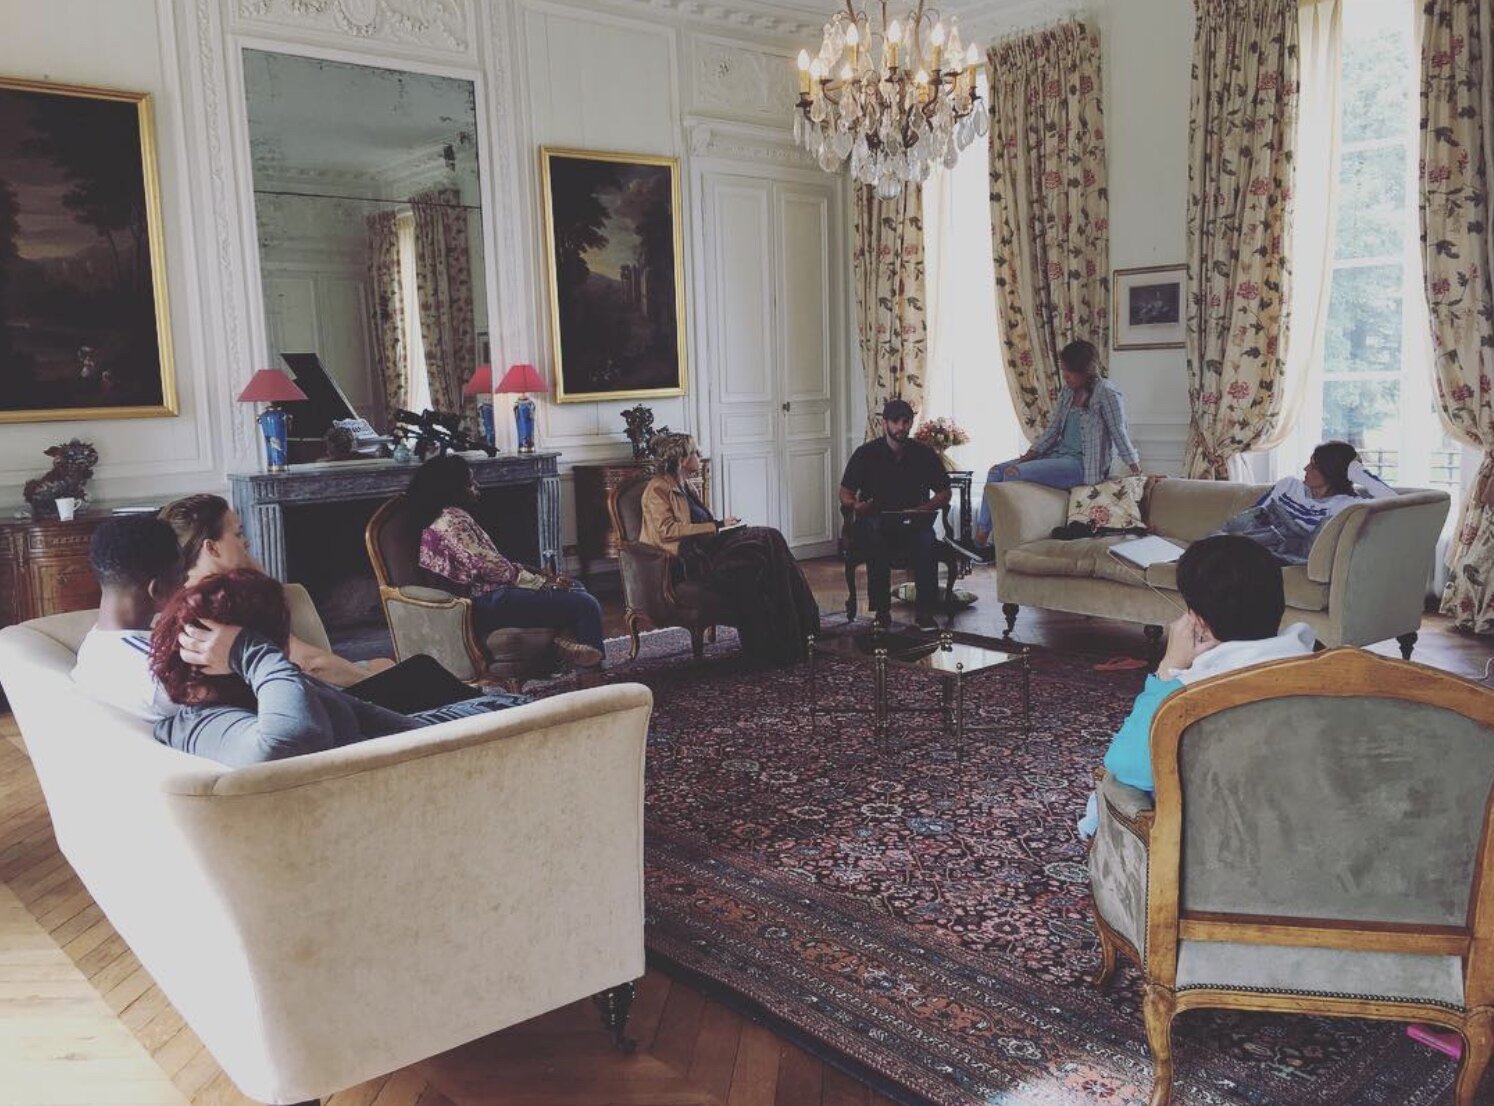 A group of people sitting in a large living room at the chateau during a company retreat in Normandy, France.